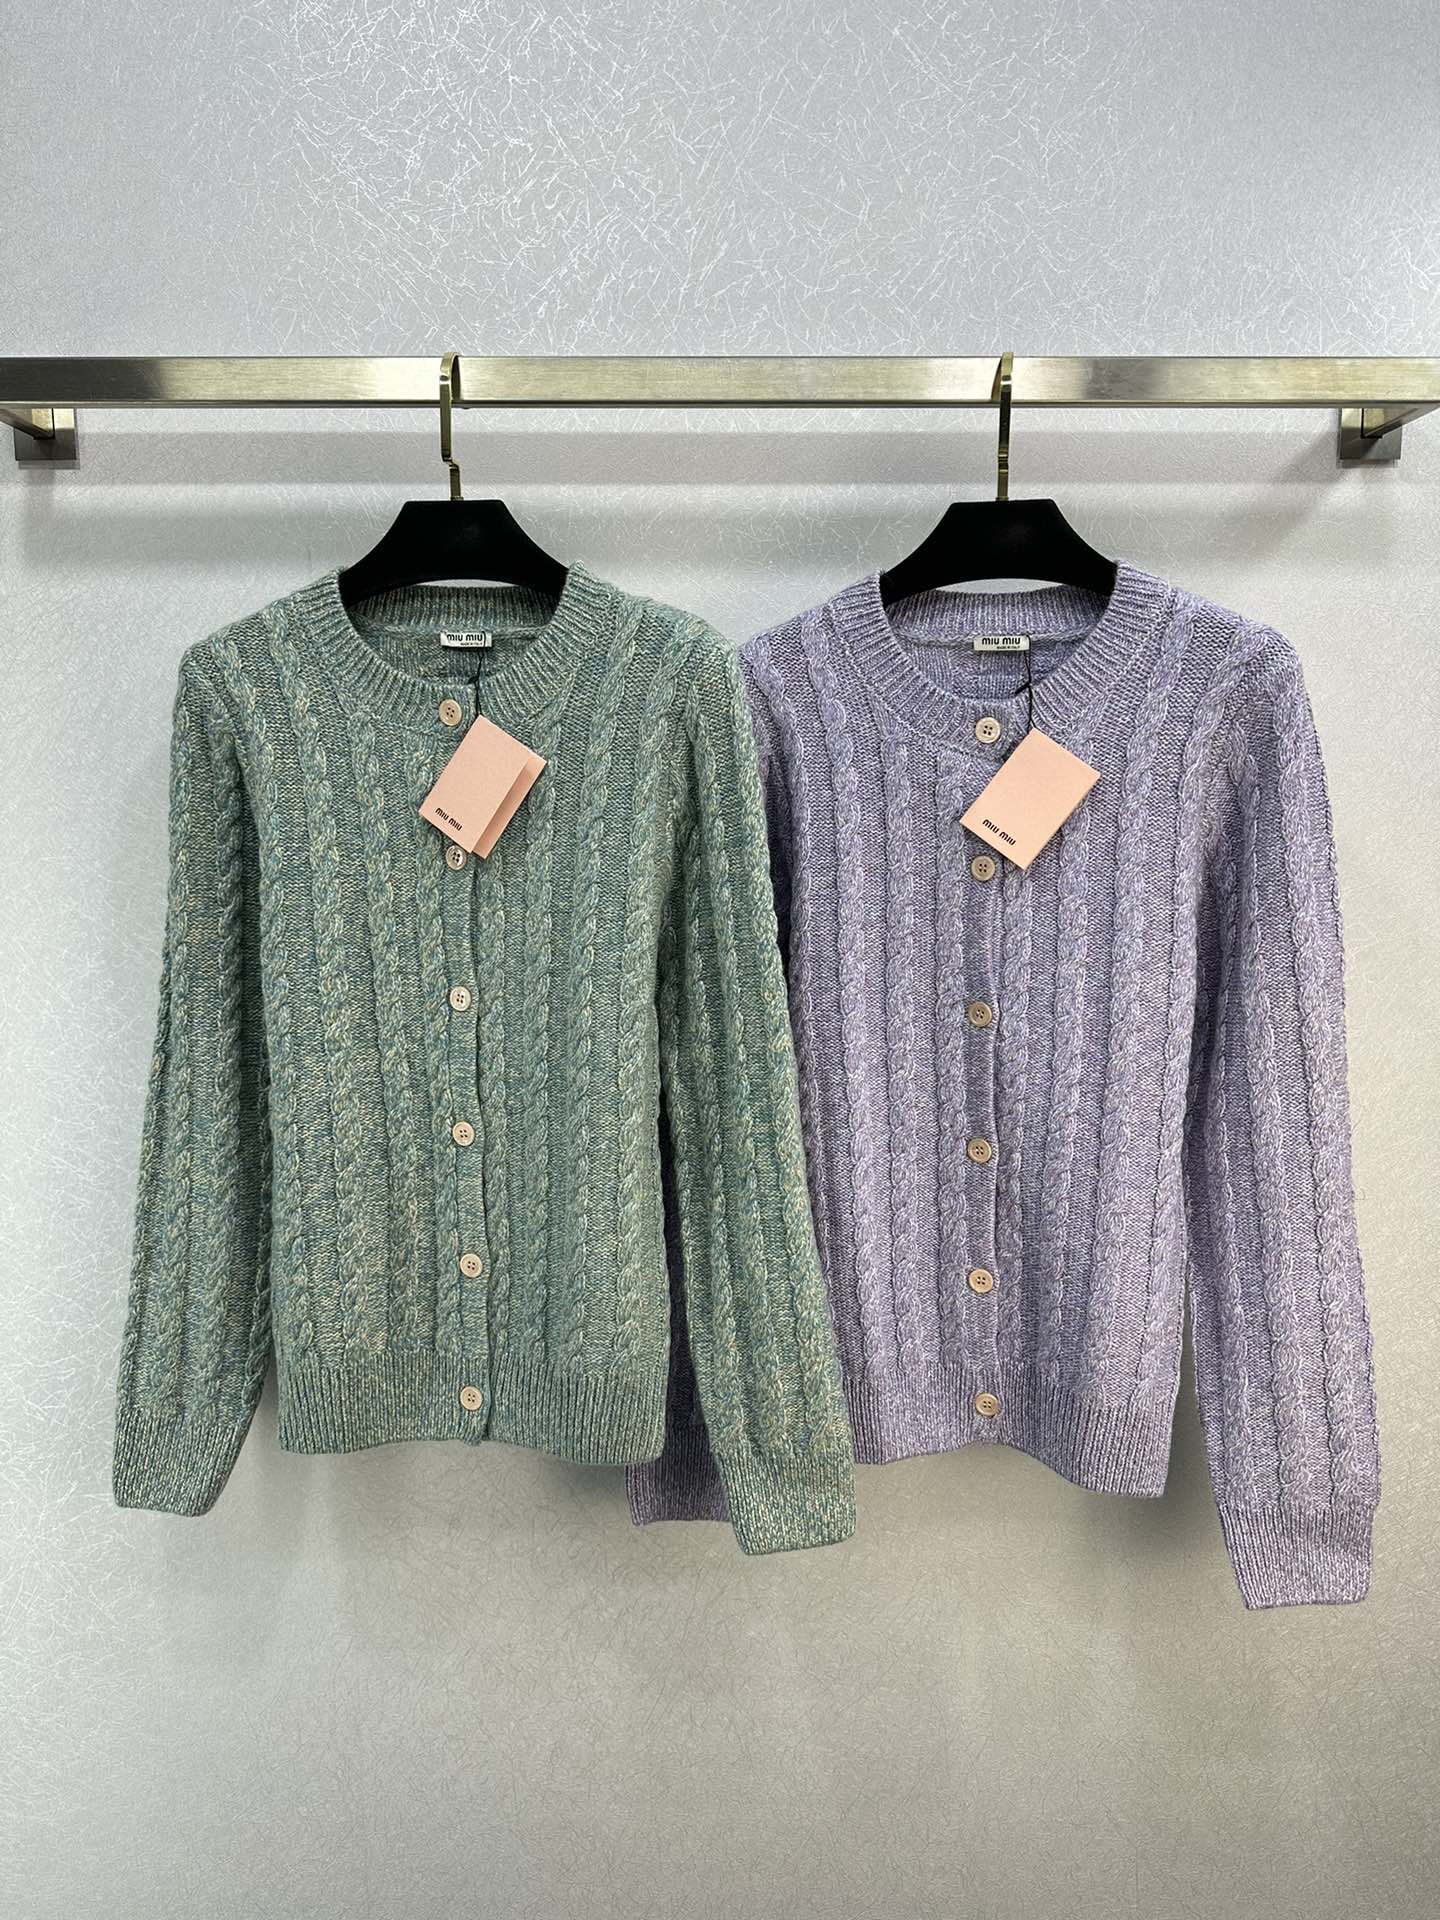 MiuMiu Clothing Cardigans Knit Sweater Best Replica 1:1
 Knitting Fall/Winter Collection